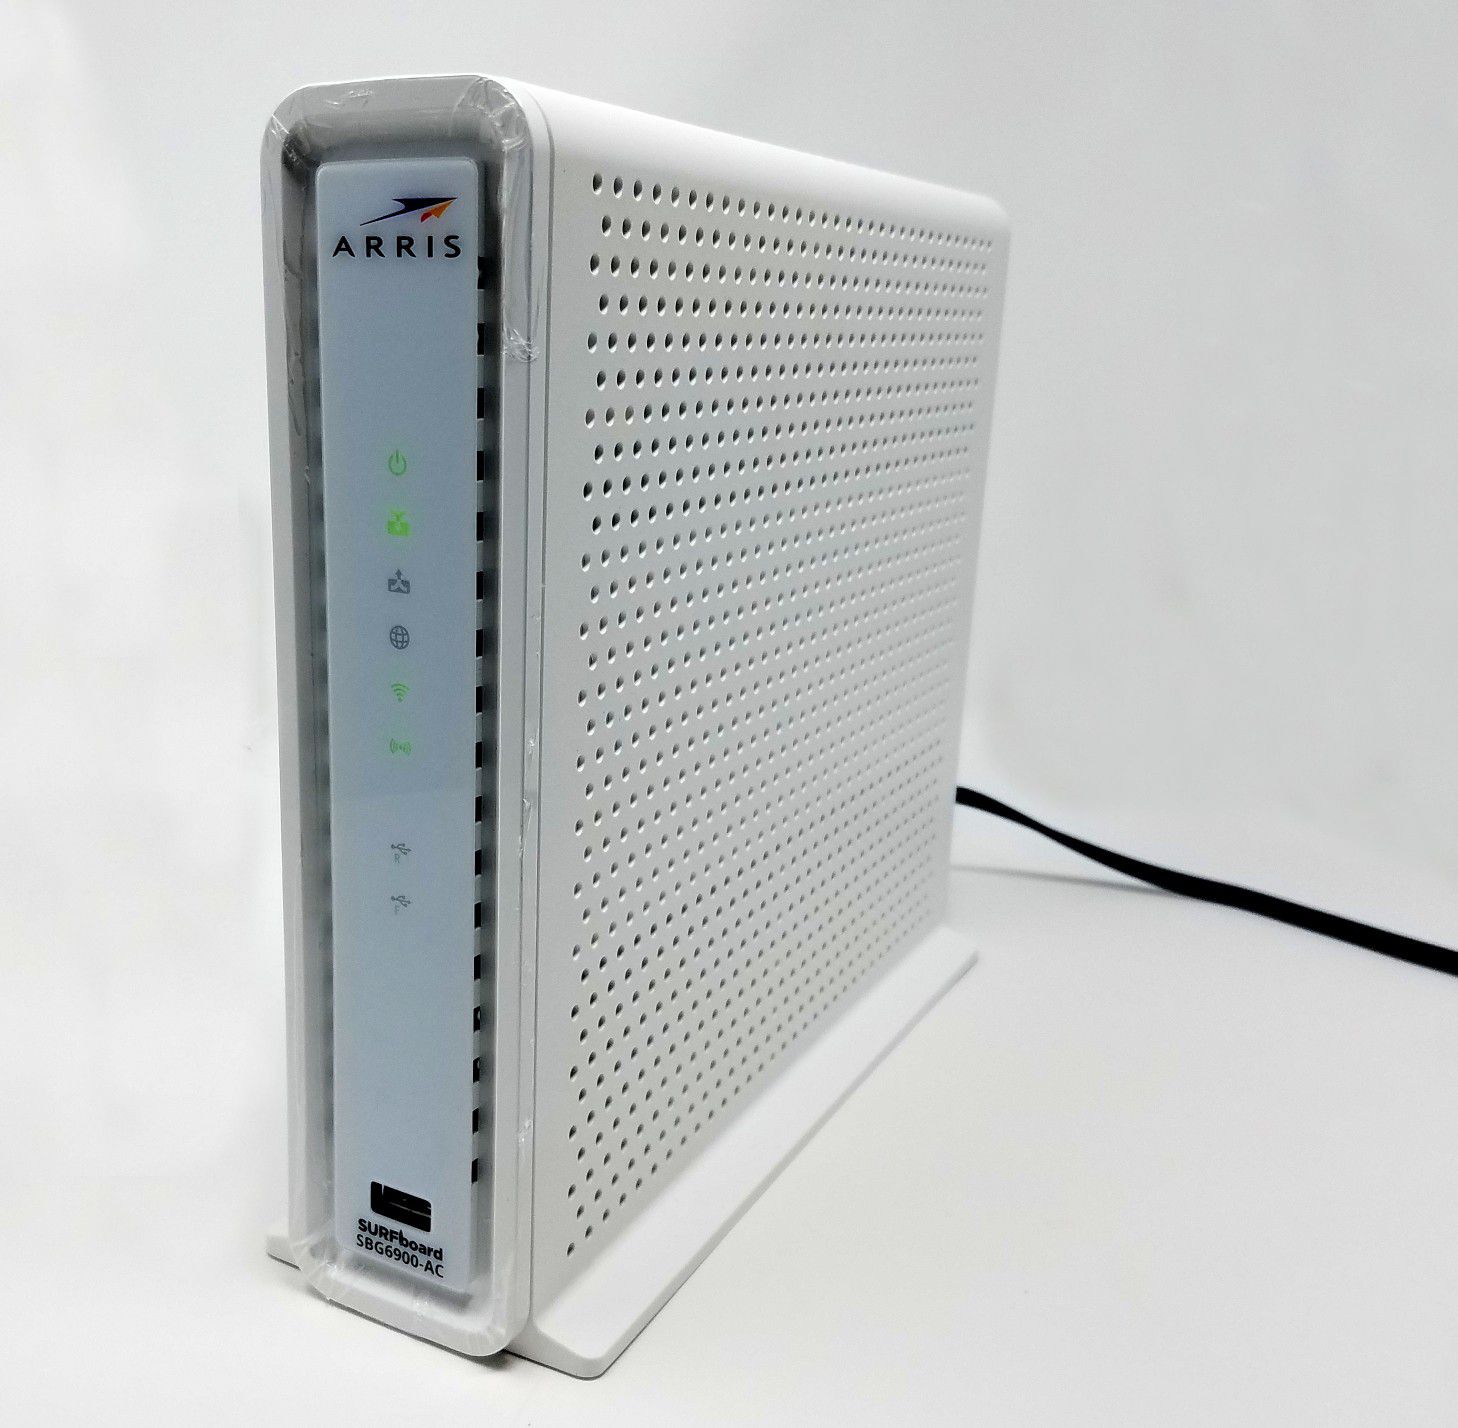 Arris surfboard cable modem and router